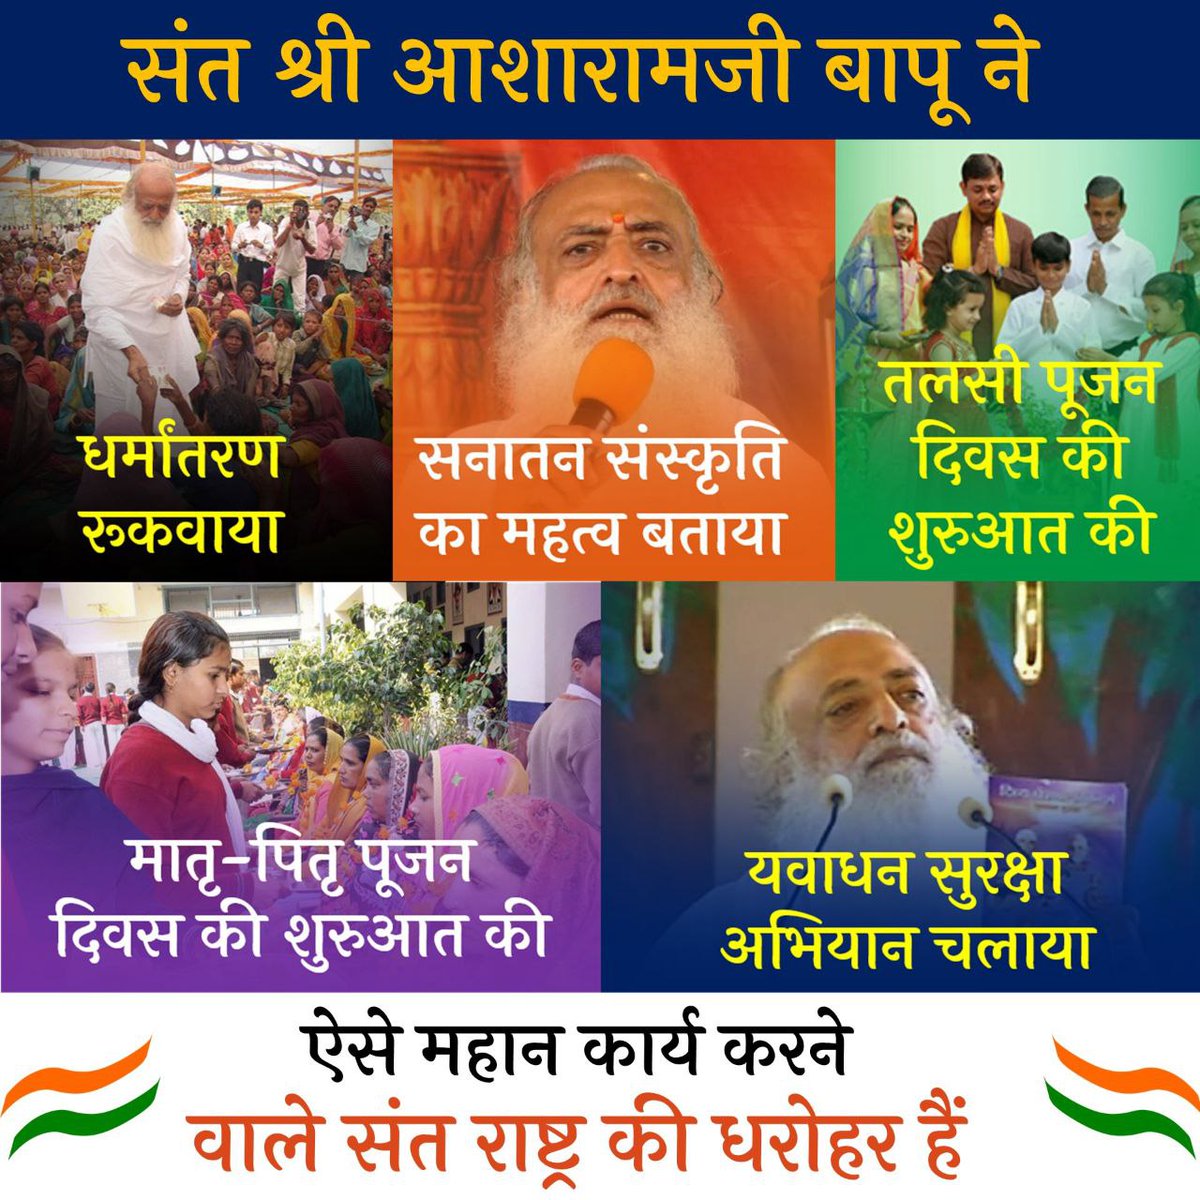 The Life Sketch of Sant Shri Asharamji Bapu is a portrayal of Divinity Personified. It beautifully illustrates the Sacrifices of a Saint and the Upliftment of Culture through His actions. Bapuji's Jeevan Jhanki is Inspirational for Society.
 #प्राणिमात्र_के_हितैषी